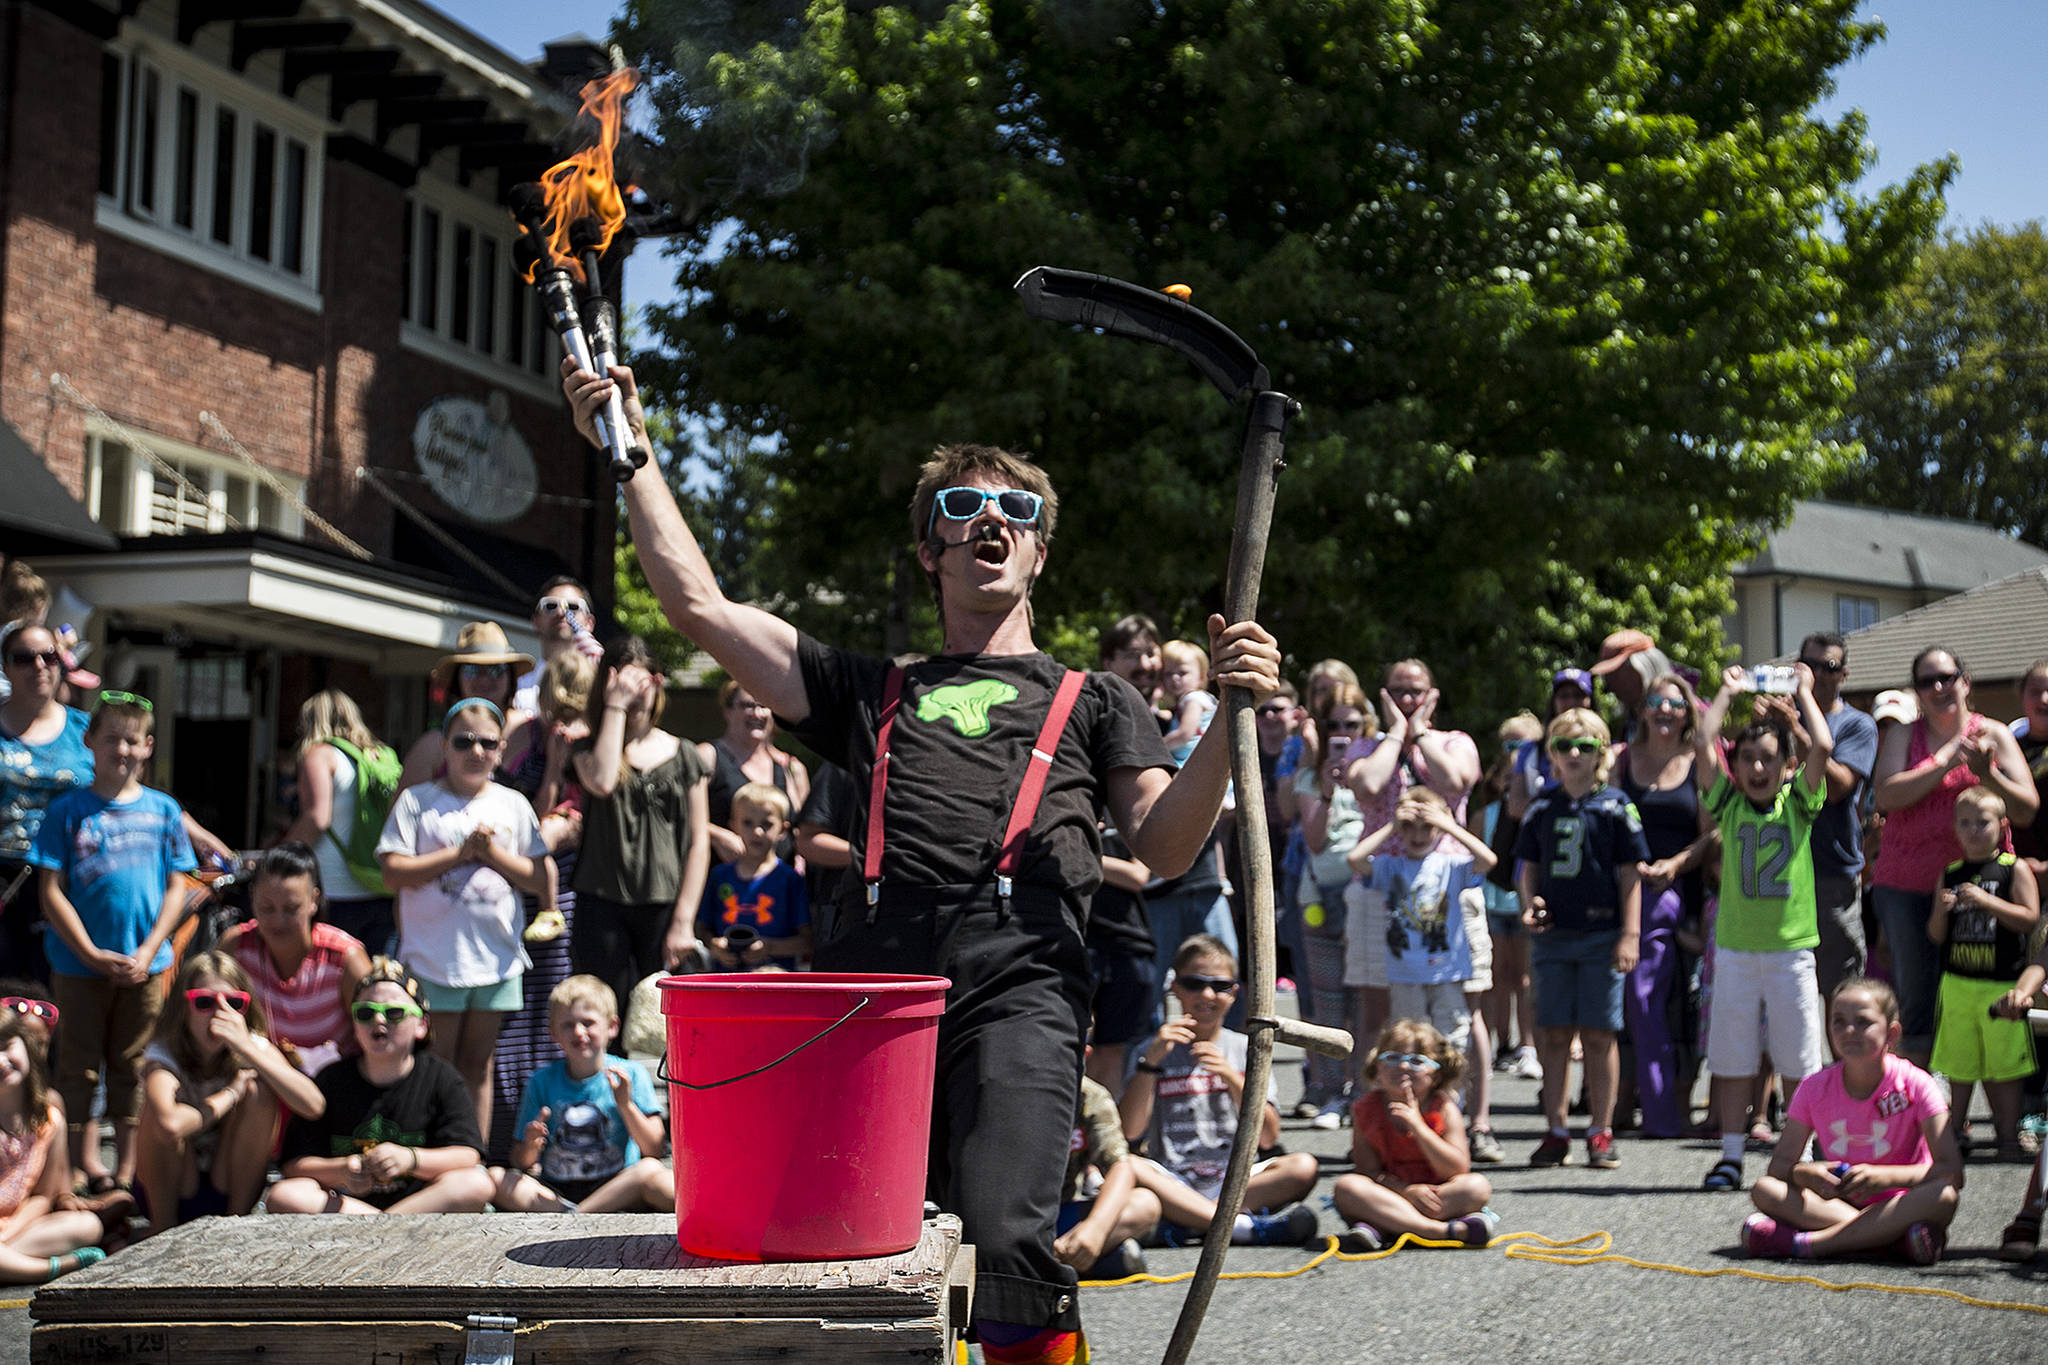 Circus performer Jules McEvoy, of Bellingham, dazzles the crowd gathered for the Kla Ha Ya Days festival in downtown Snohomish on Saturday. (Ian Terry / The Herald)